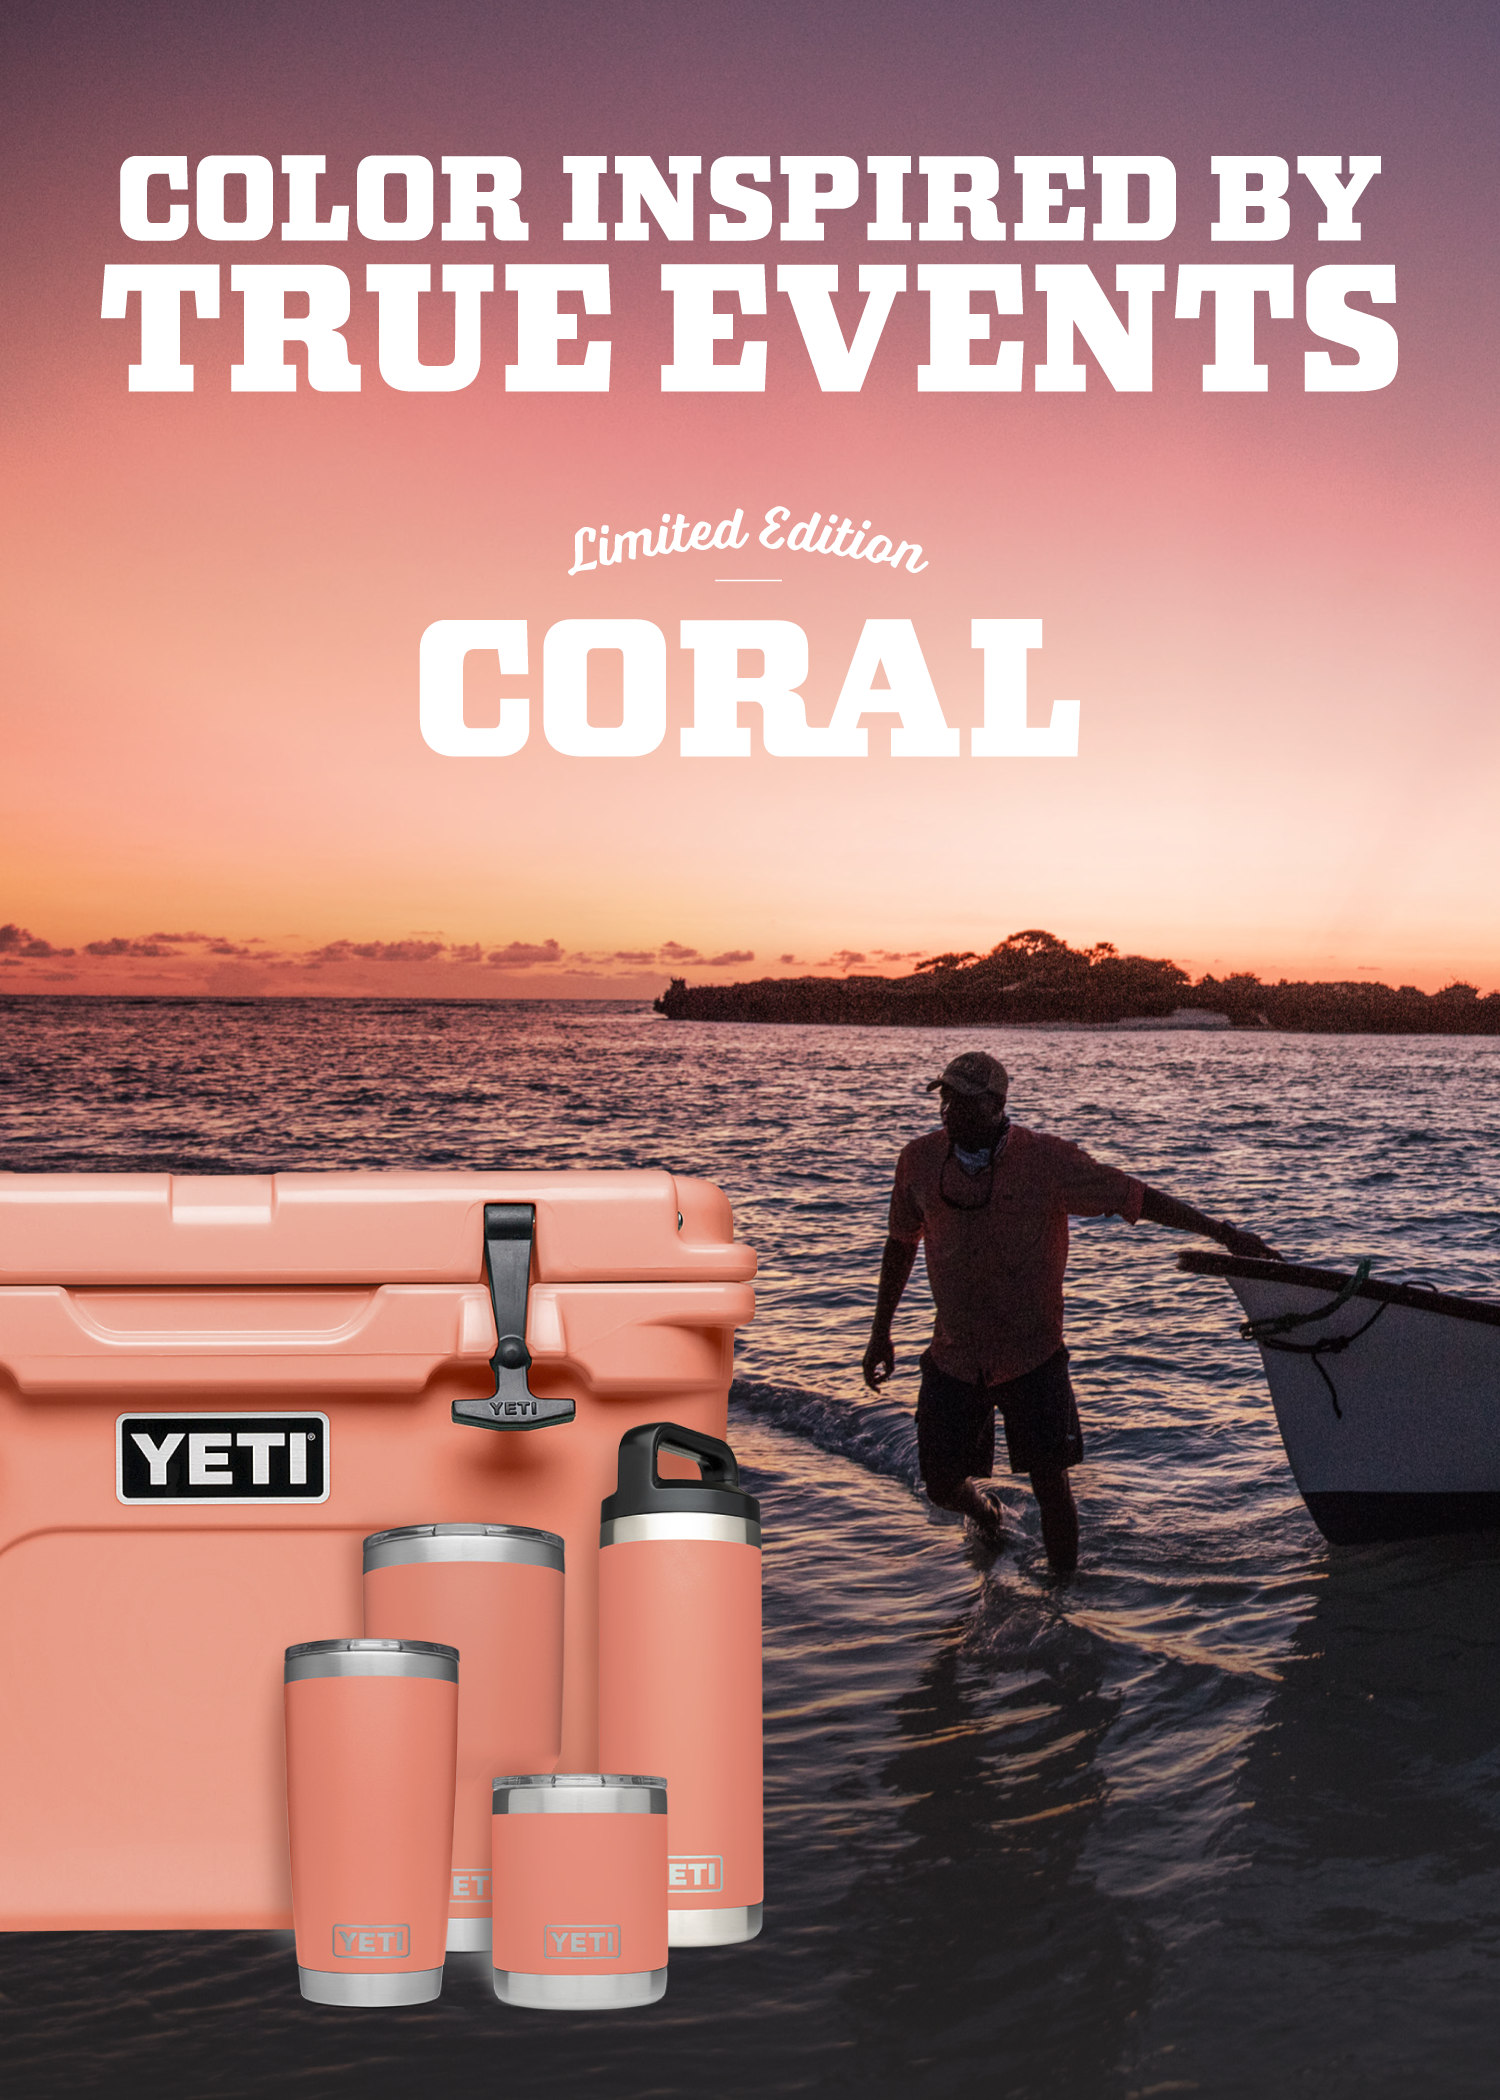 yeti limited edition coral